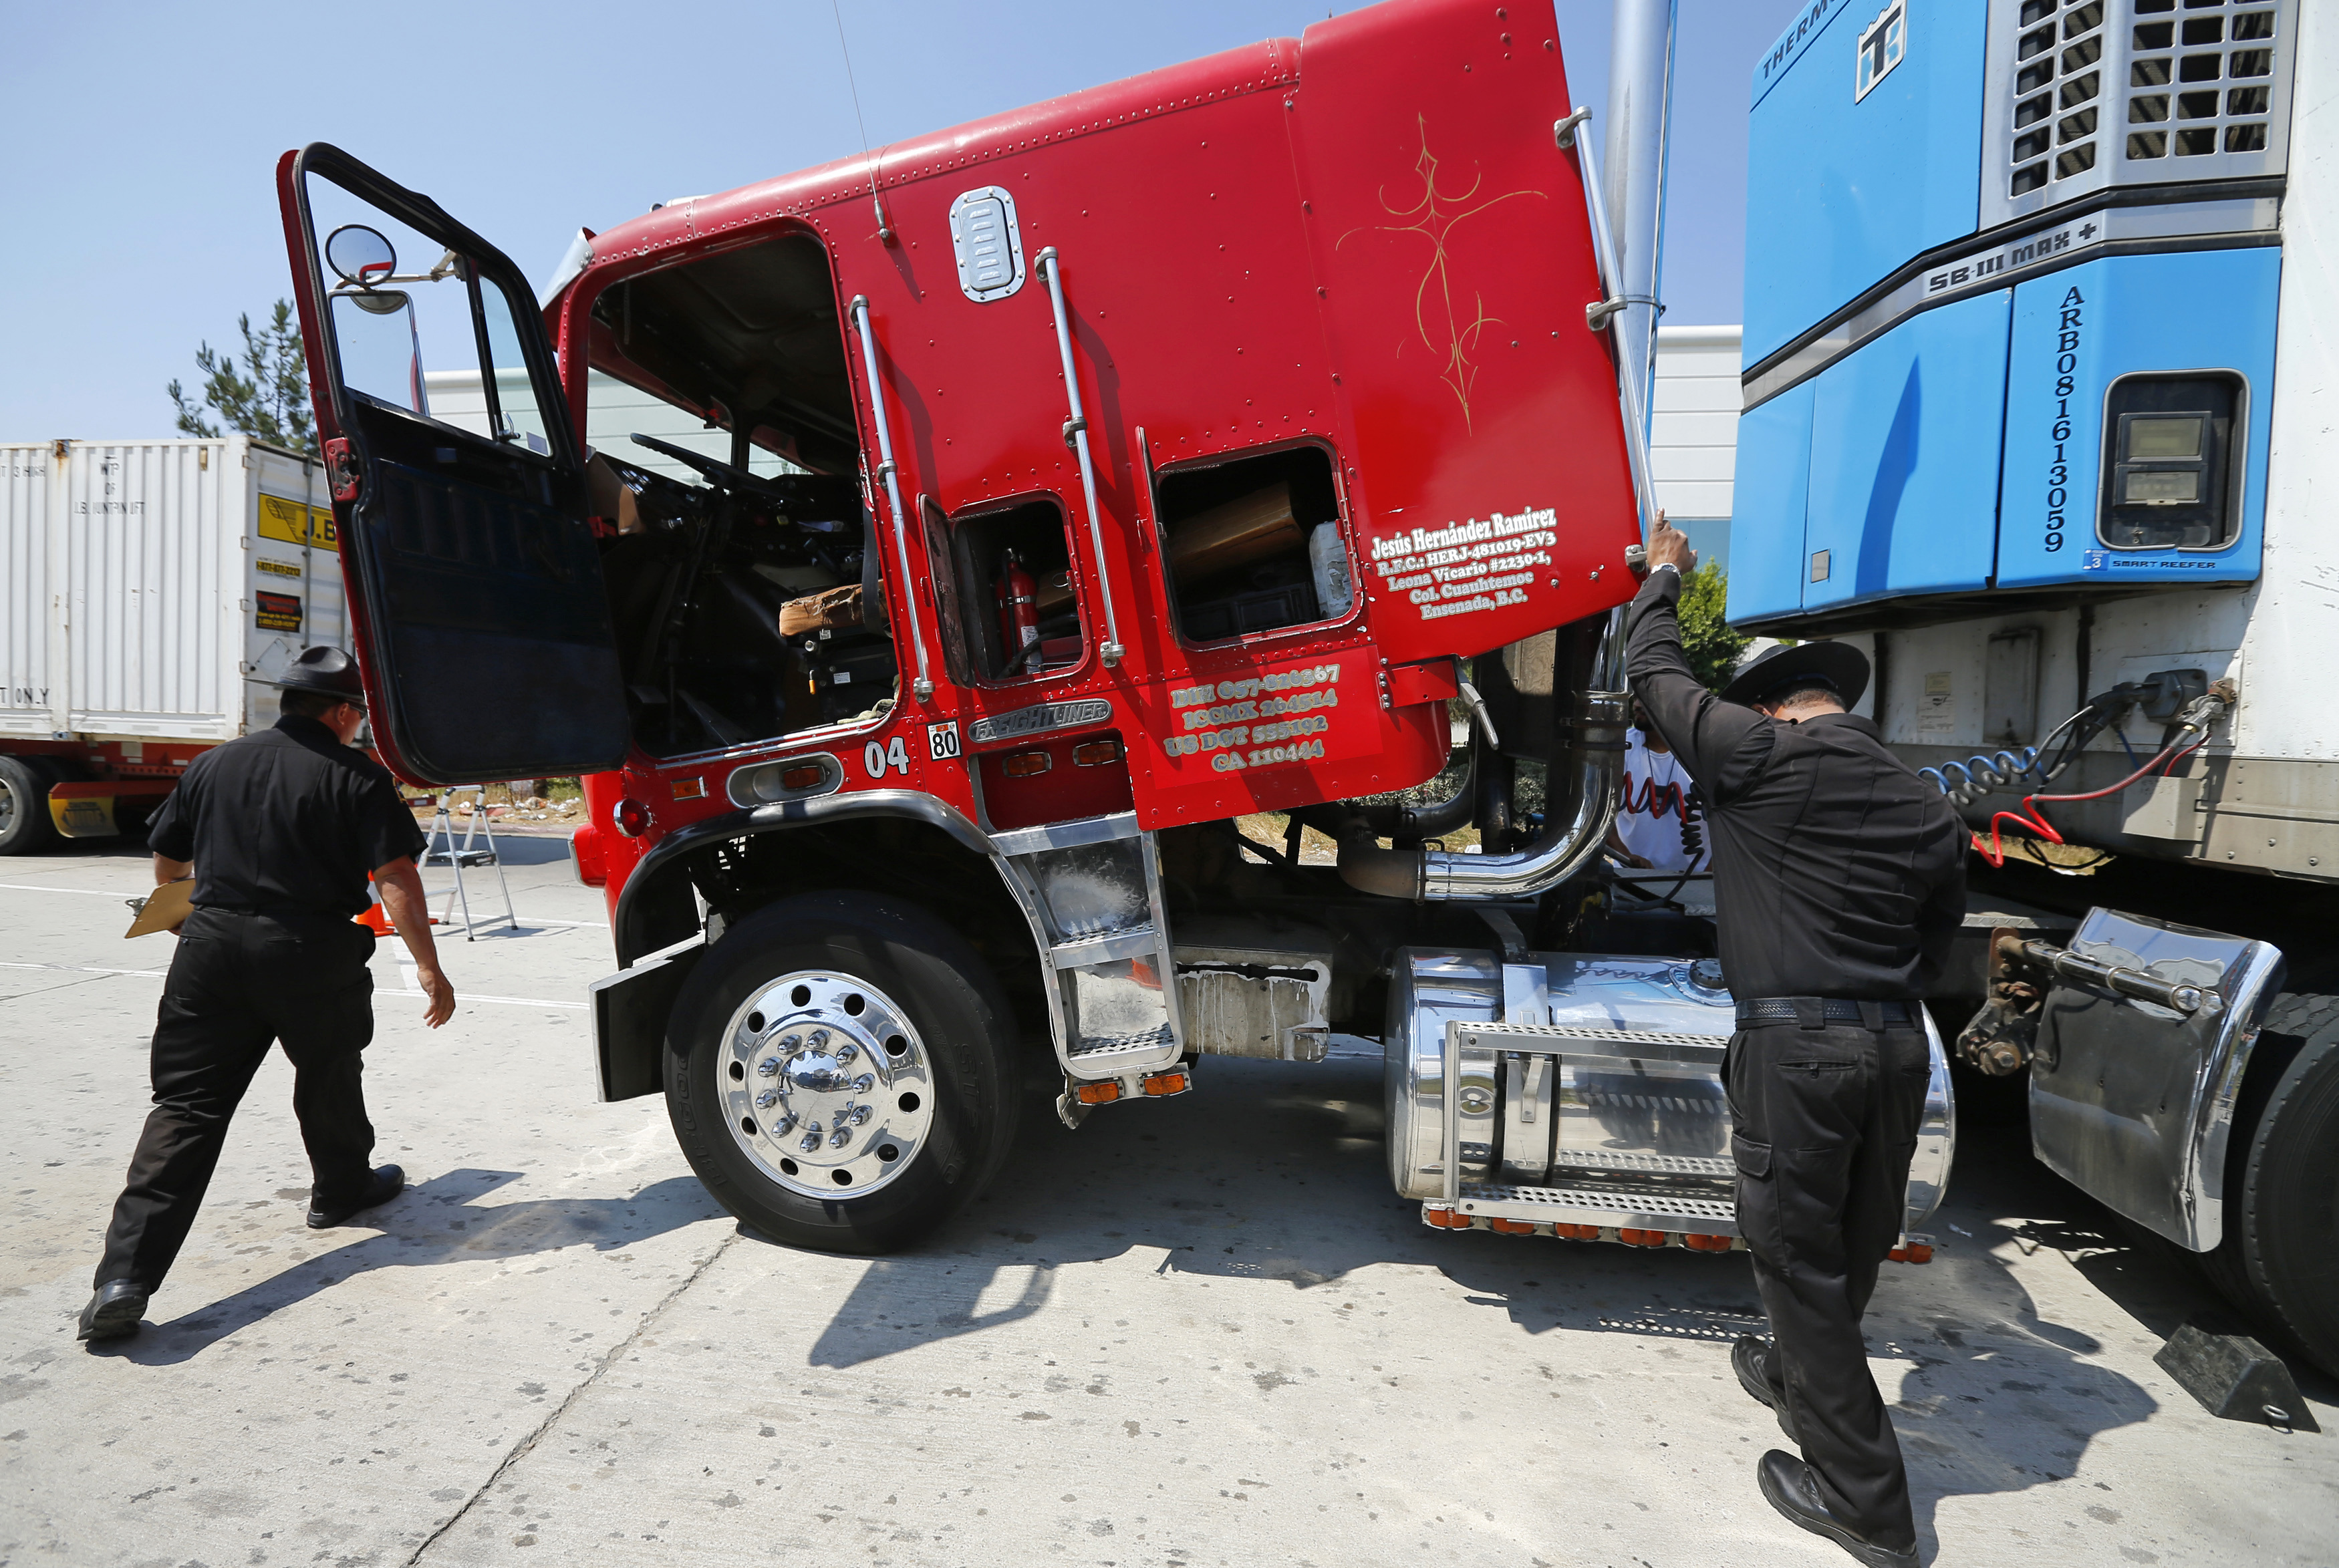 California Air Resources field representatives Armenta and Andujar work a checkpoint set up to inspect heavy-duty trucks traveling near the Mexican-U.S. border in Otay Mesa, California